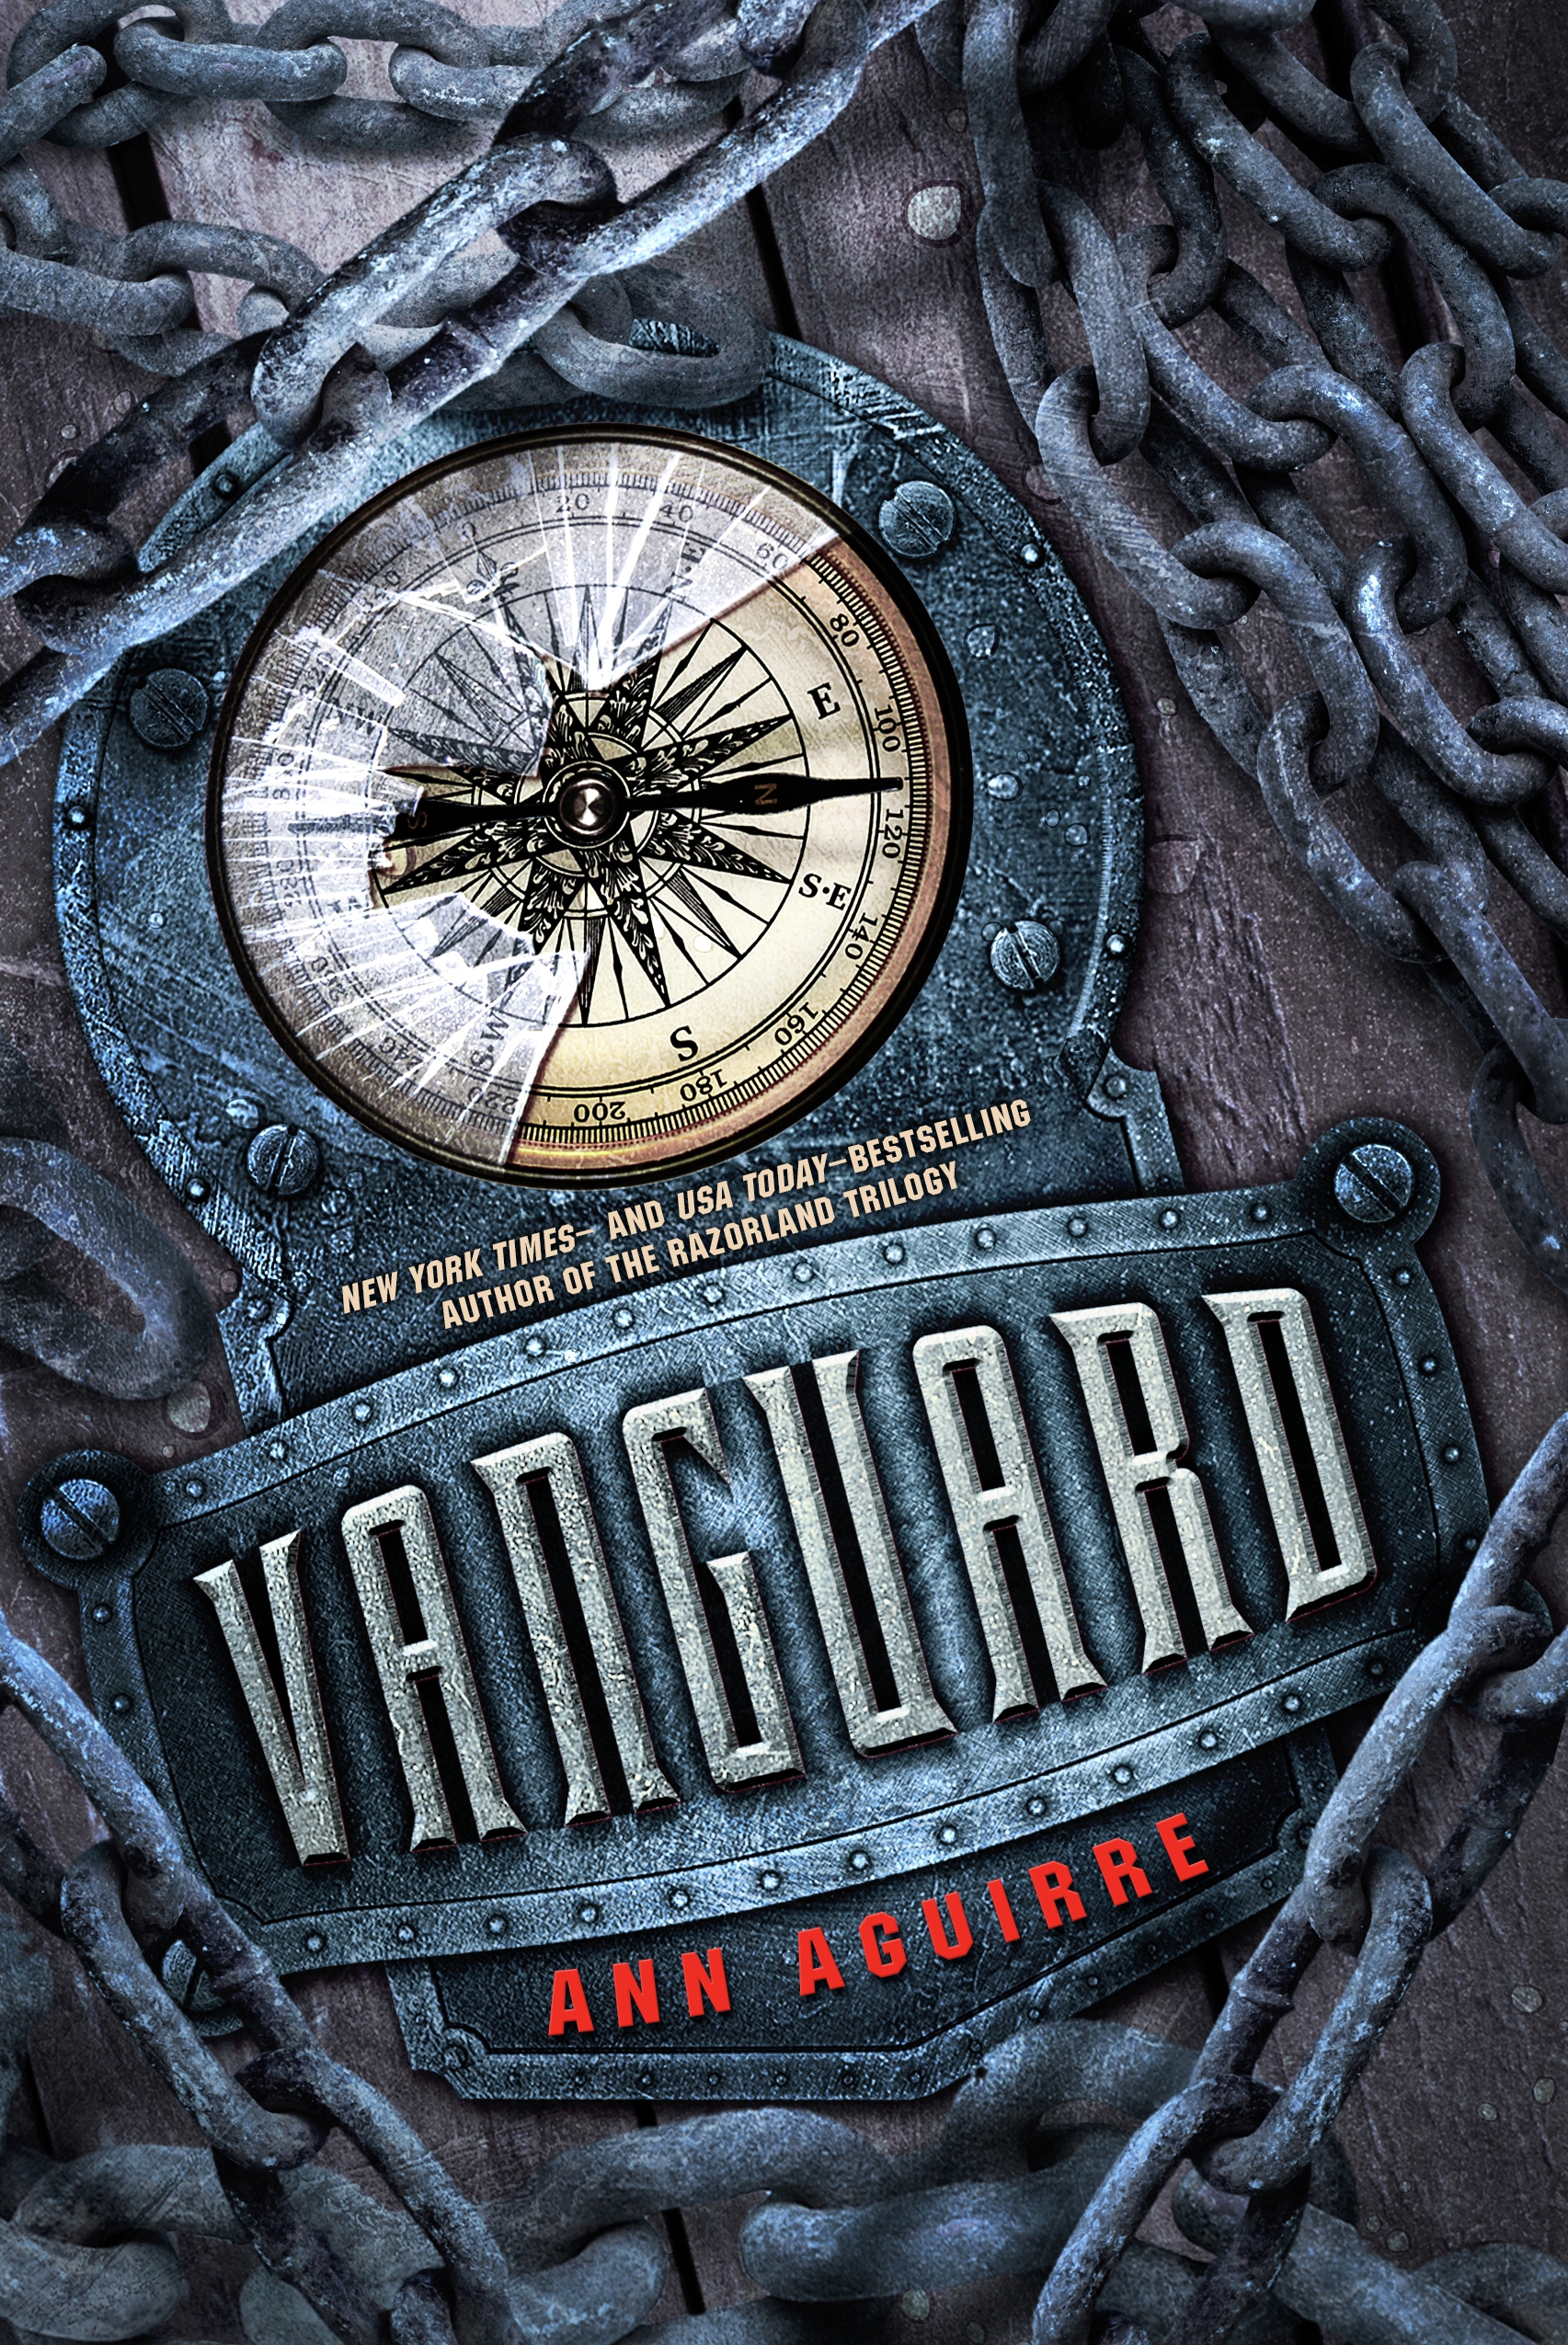 Images for Vanguard